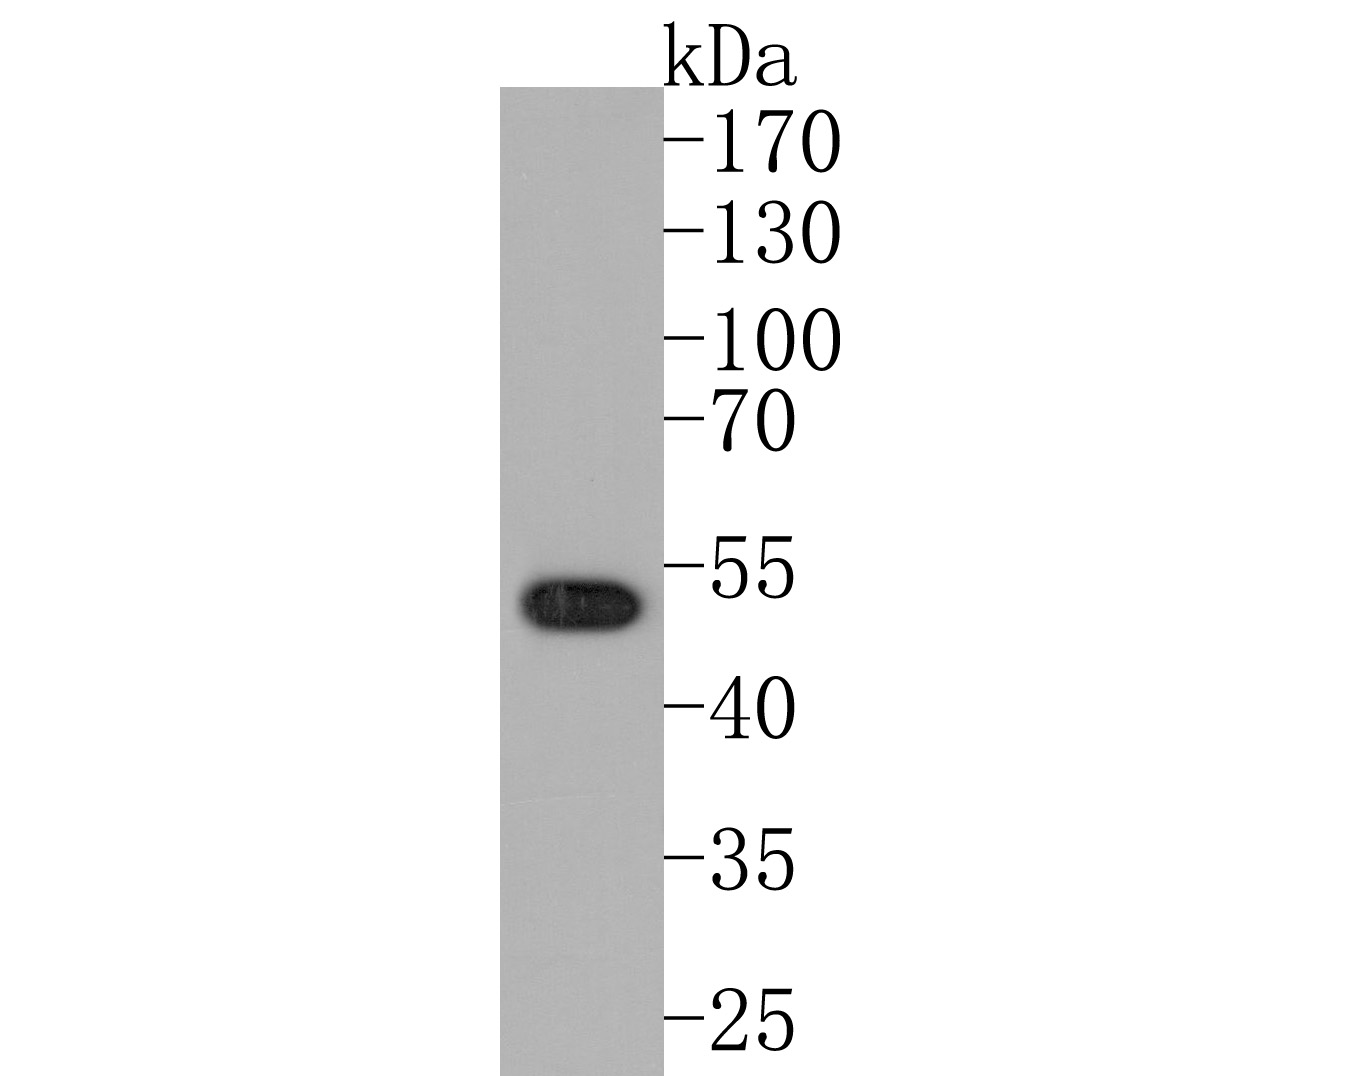 Western blot analysis of CYP26A1 on HepG2 cell lysates. Proteins were transferred to a PVDF membrane and blocked with 5% BSA in PBS for 1 hour at room temperature. The primary antibody (ET7108-02, 1/500) was used in 5% BSA at room temperature for 2 hours. Goat Anti-Rabbit IgG - HRP Secondary Antibody (HA1001) at 1:200,000 dilution was used for 1 hour at room temperature.